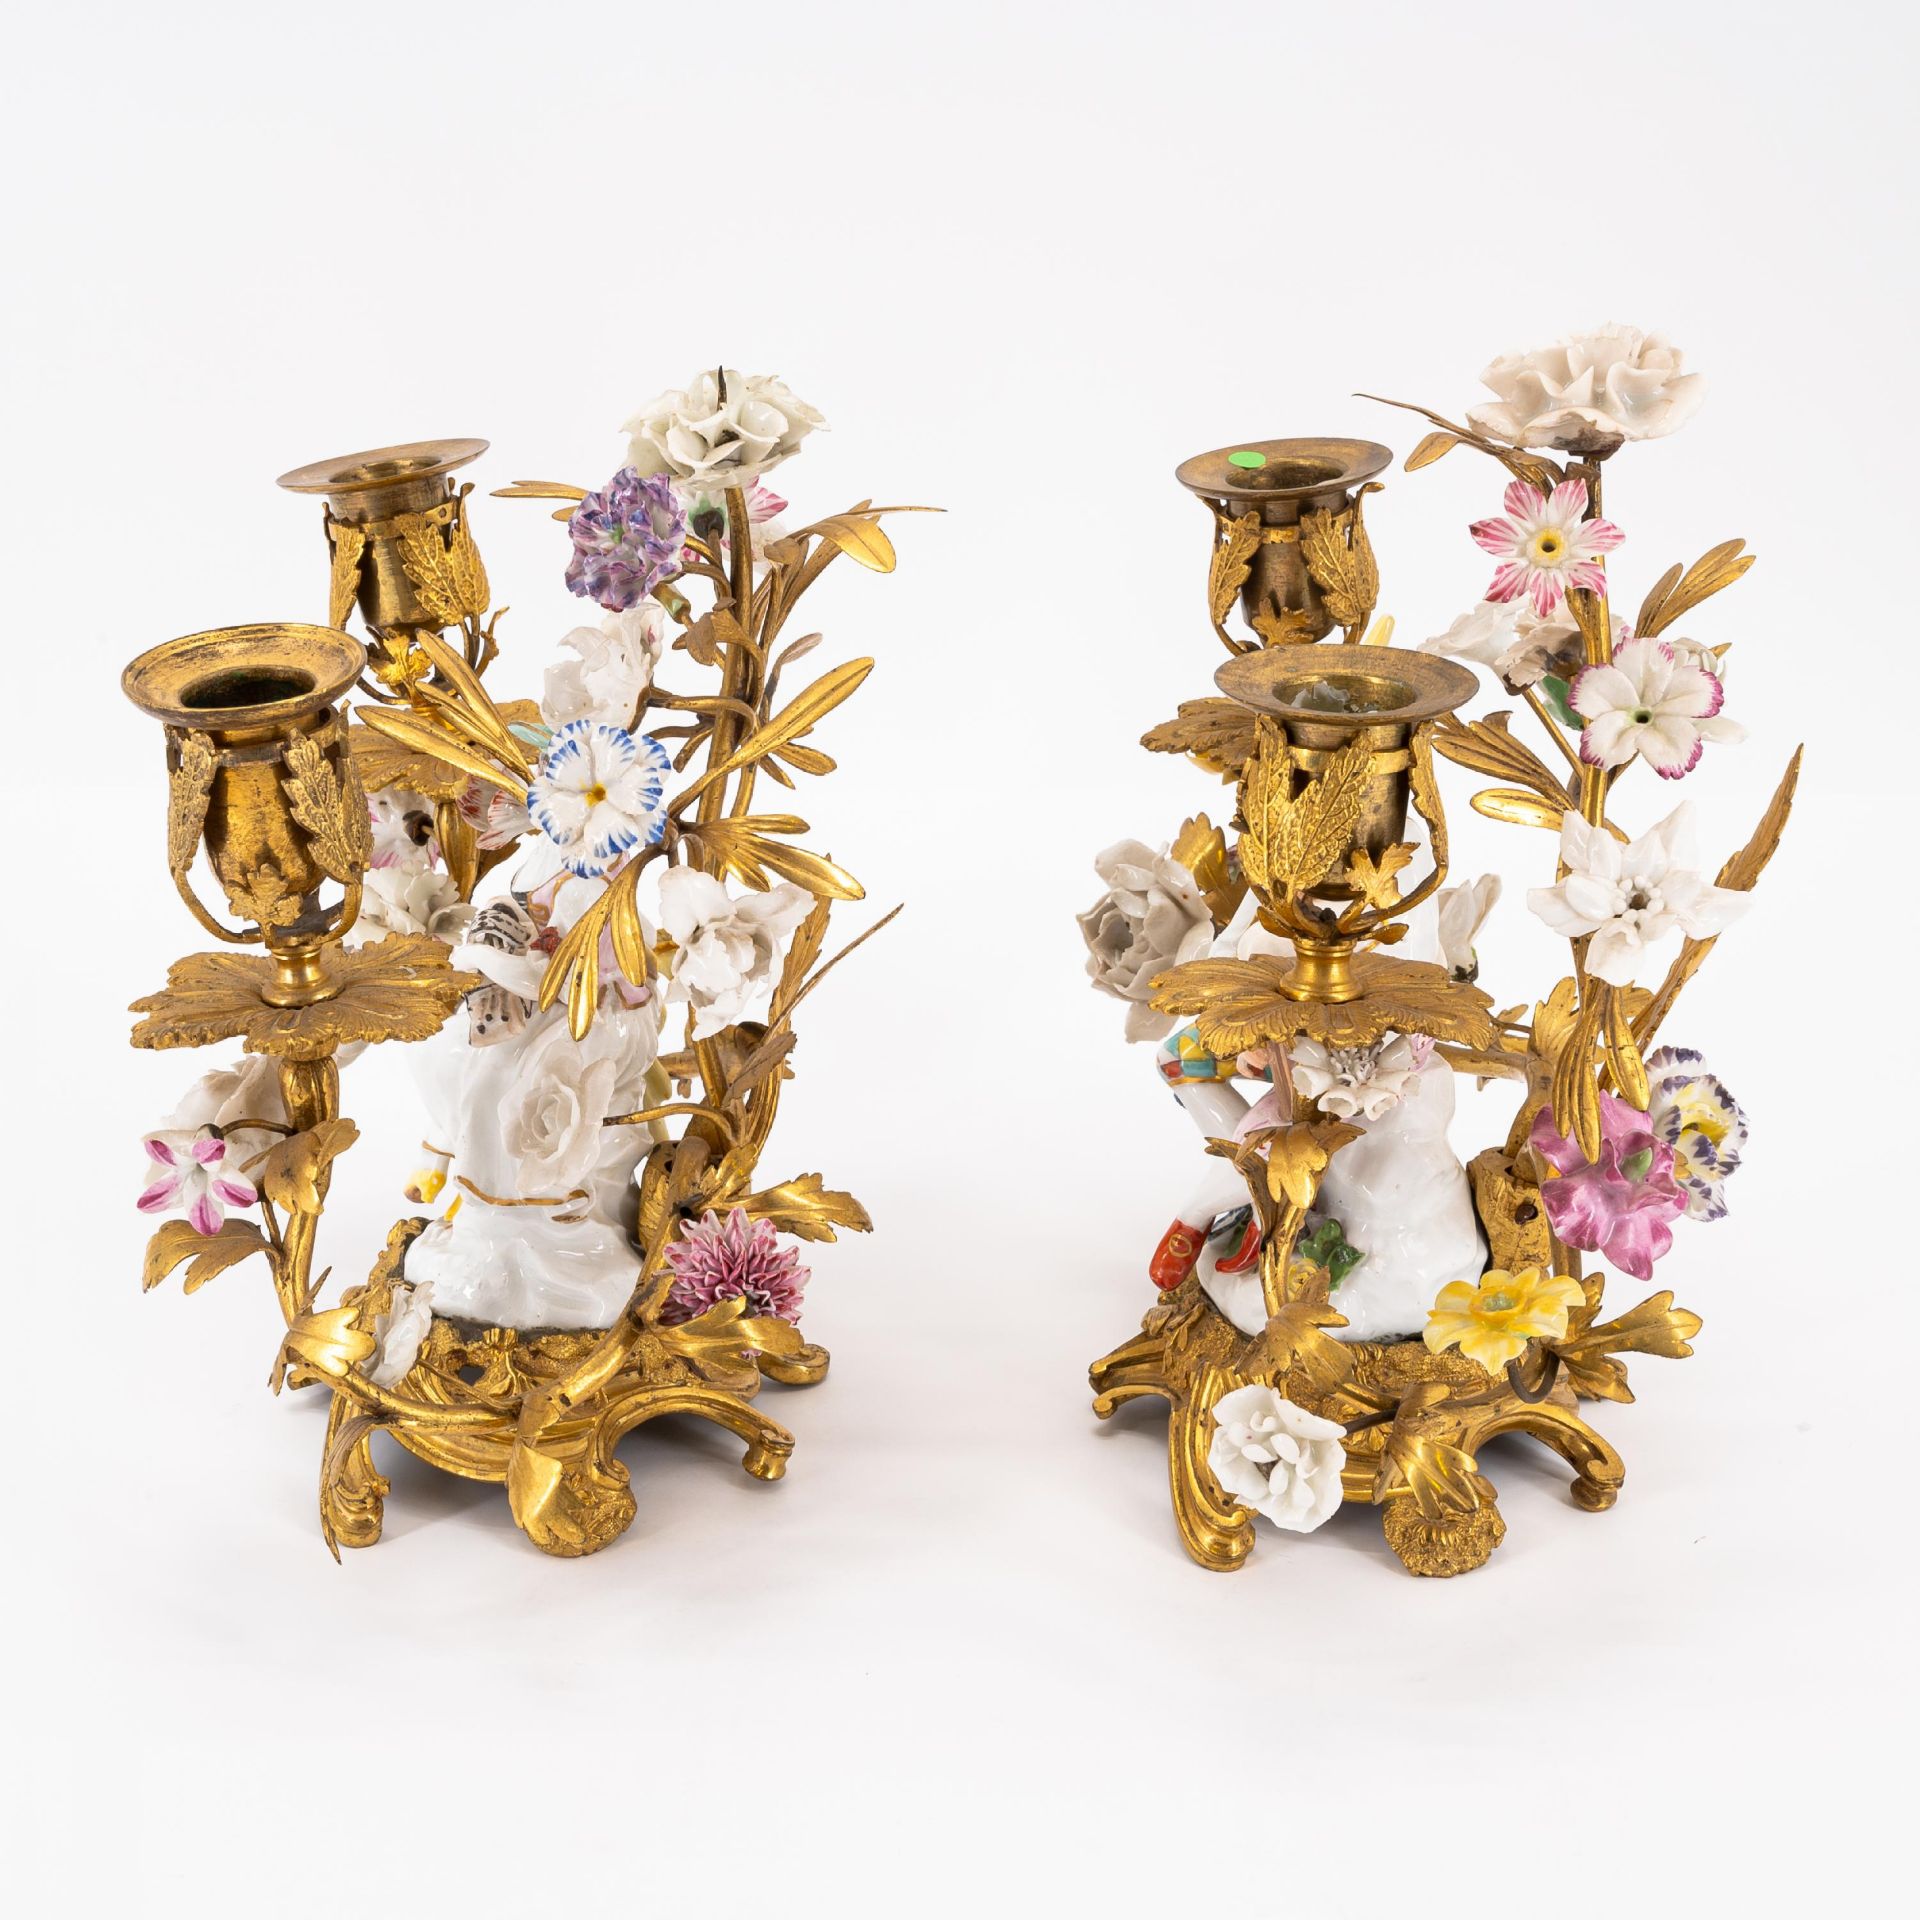 France: PAIR OF GILT BRONZE CANDELABRAS WITH TENDRIL BRANCHES AND PORCELAIN MUSICIANS - Image 2 of 5